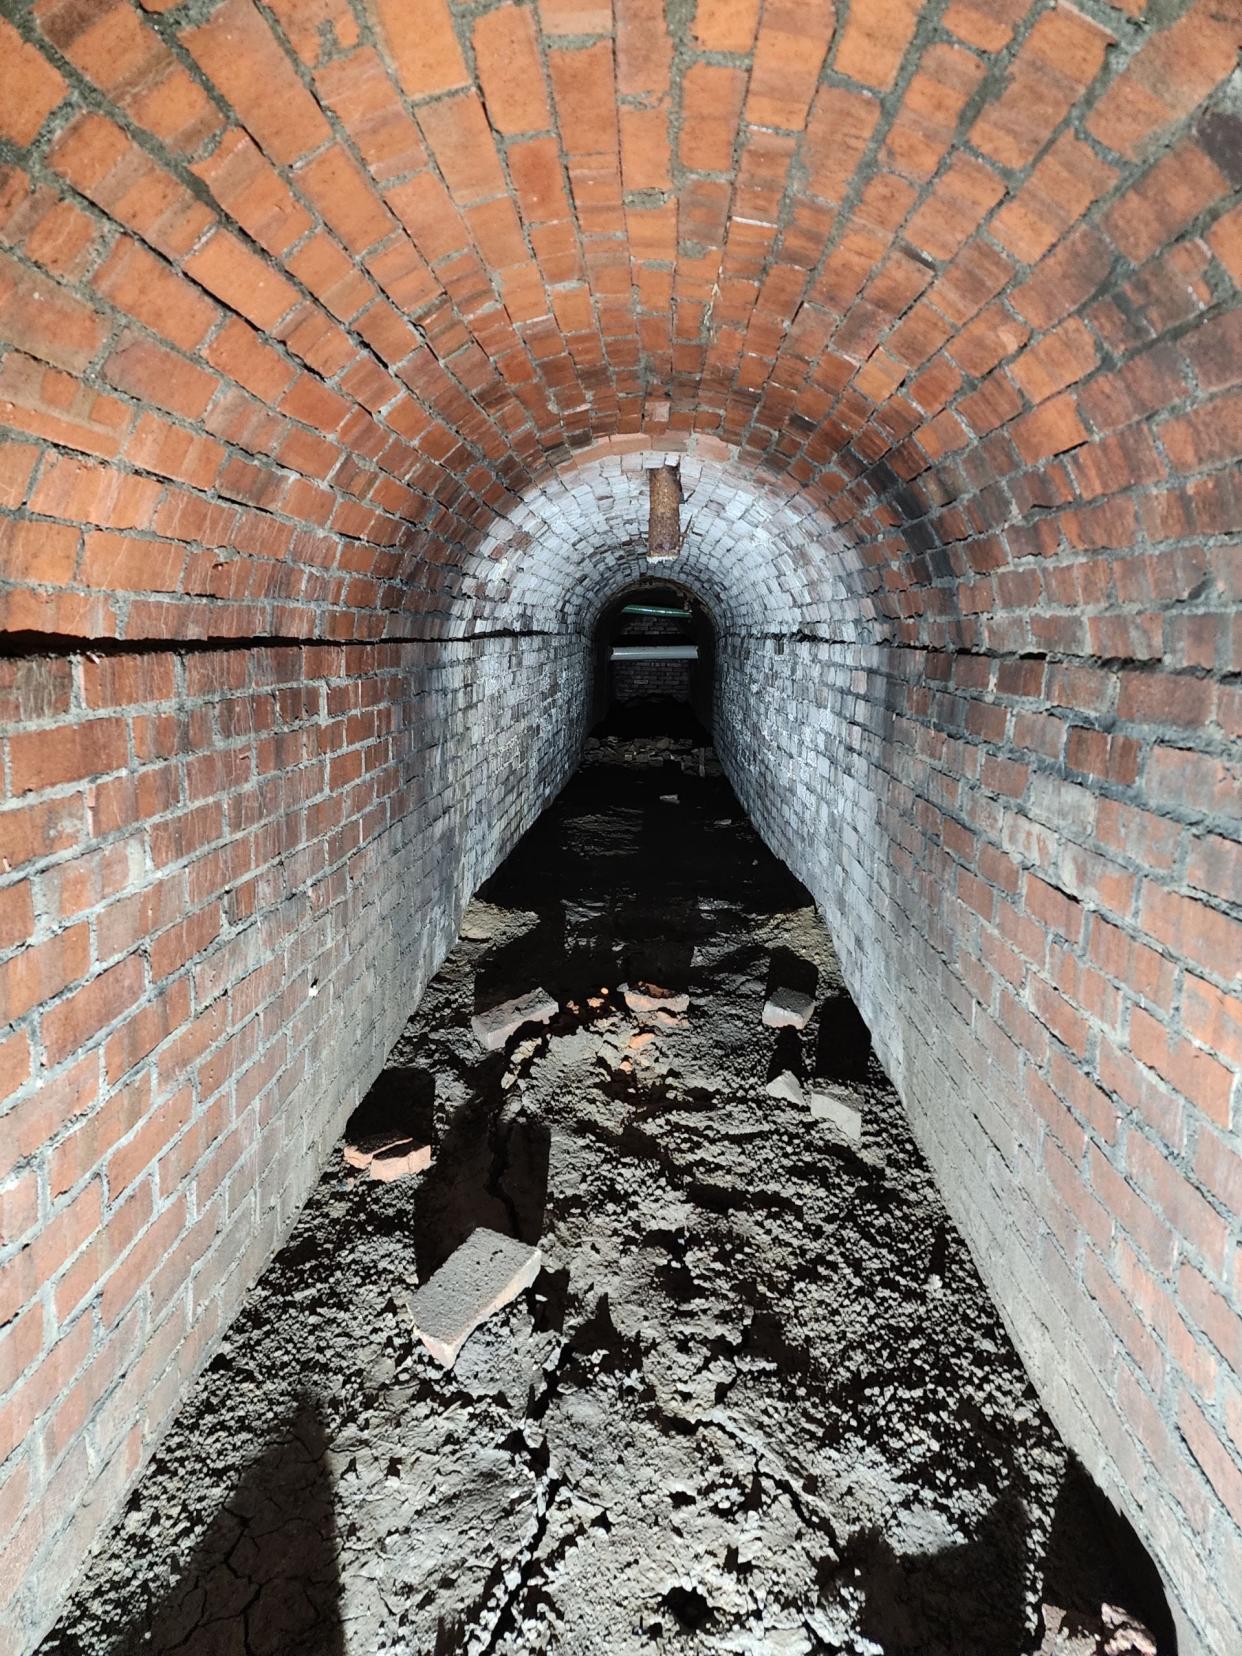 The brick tunnel discovered recently in New Brighton on the Merrick Art Gallery property.